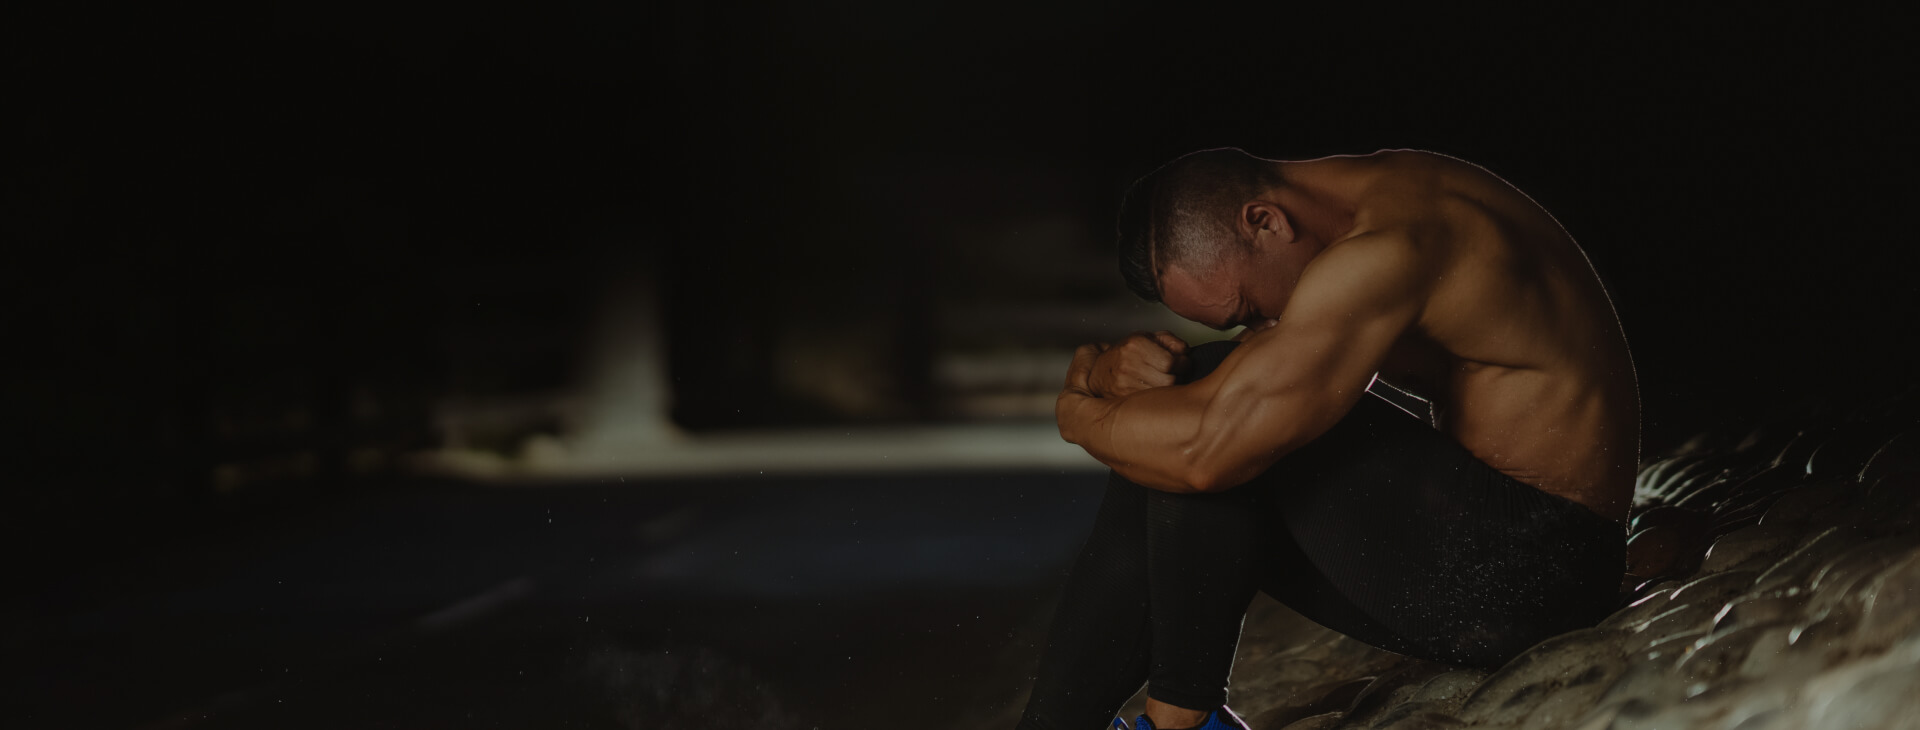 Rezience Header Image - Gil Devera crouched over in Nike's apparel